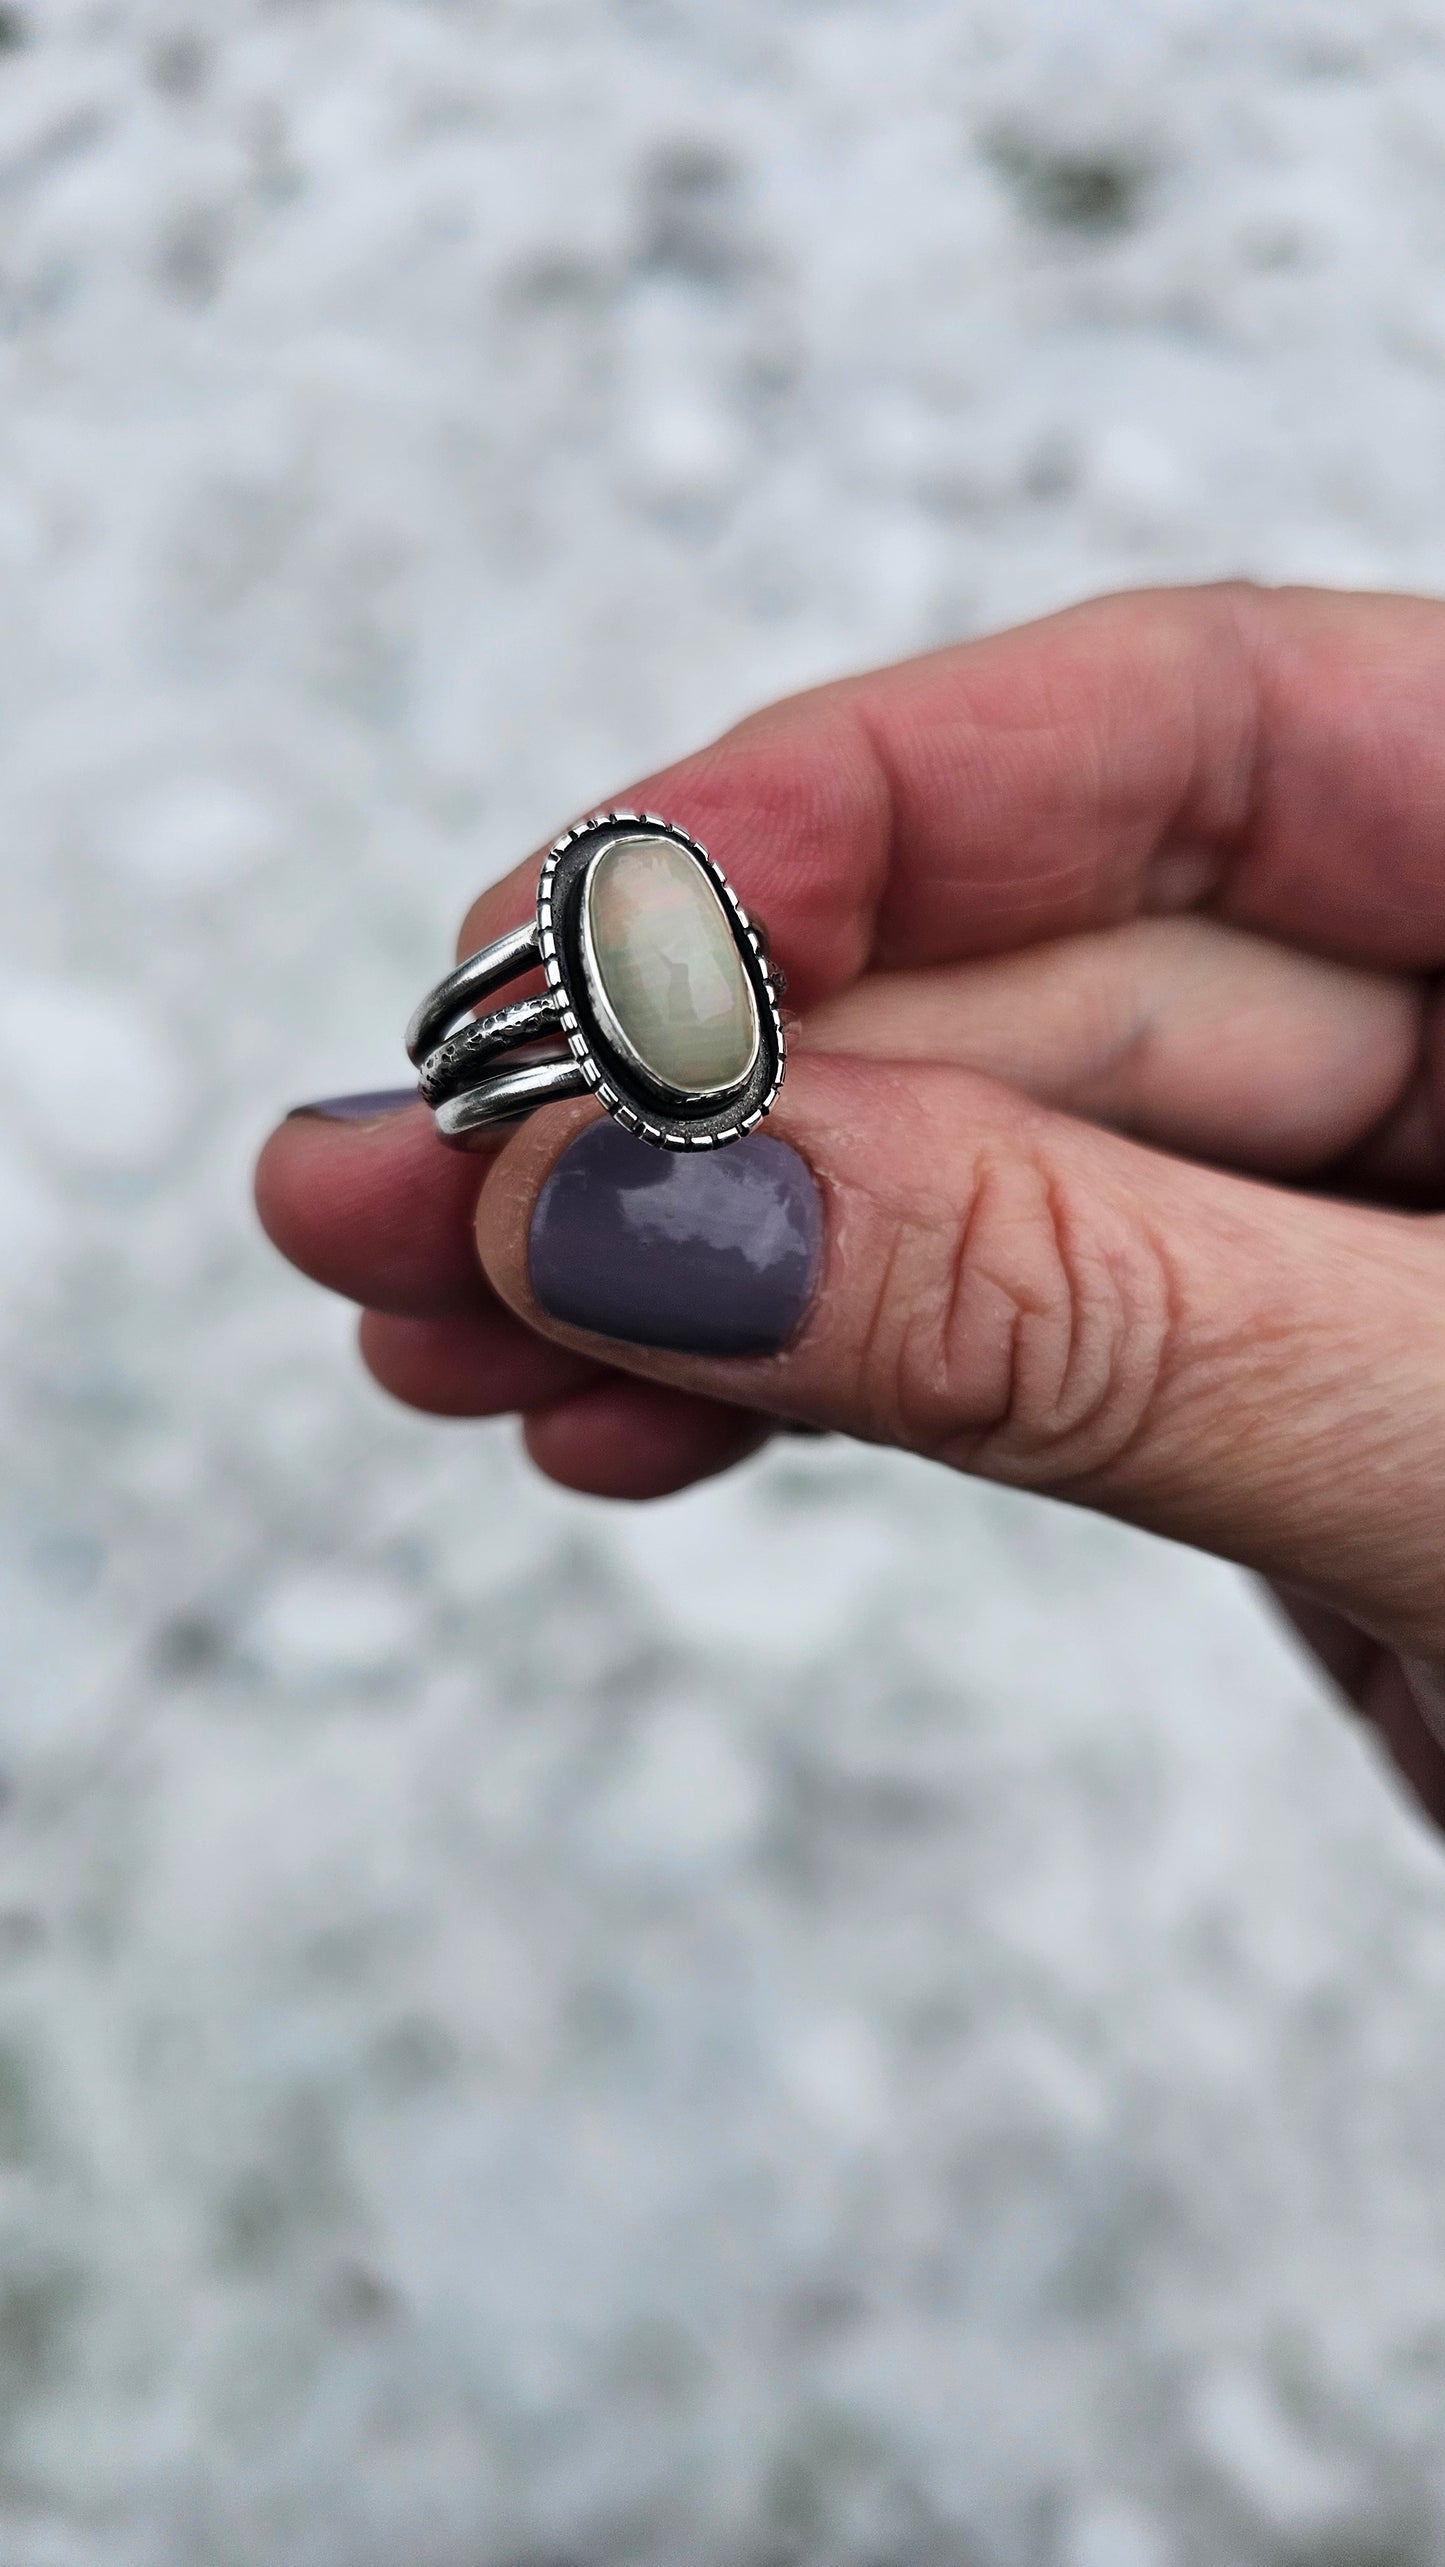 x FIREFROST Ring (Fits Size 5 3/4 to 6) - Ethiopian Opal in Fine and Sterling Silver